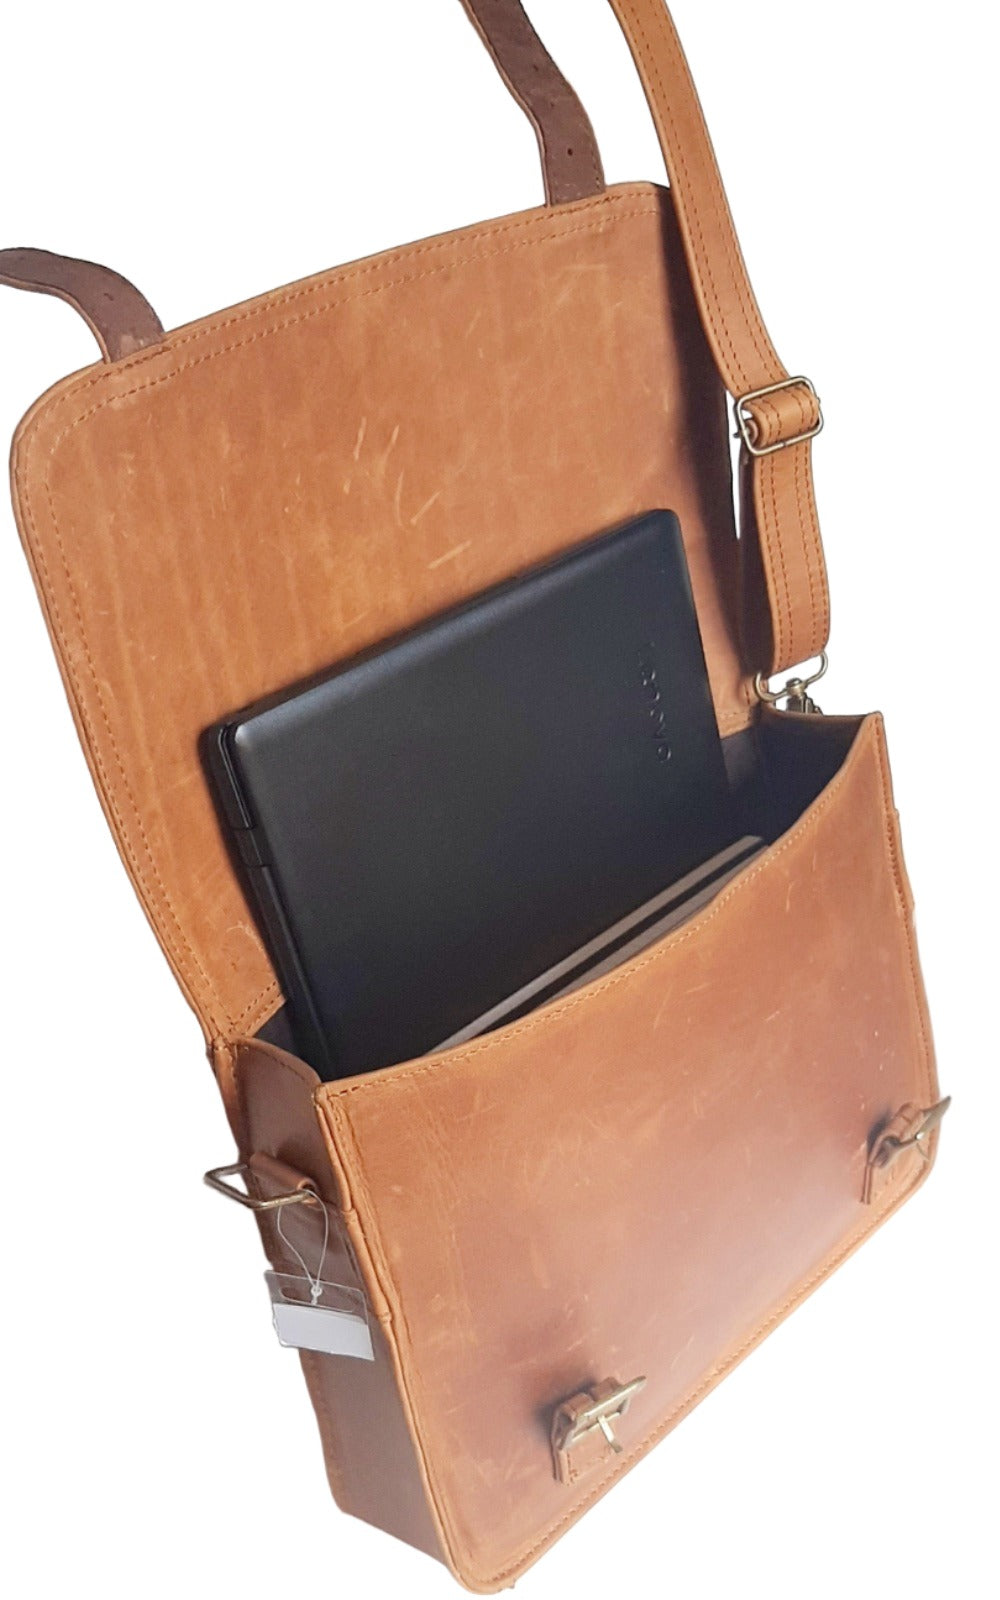 A beautiful genuine leather hand made Carryn 13-14" laptop bag with a Lenovo laptop and A4 books